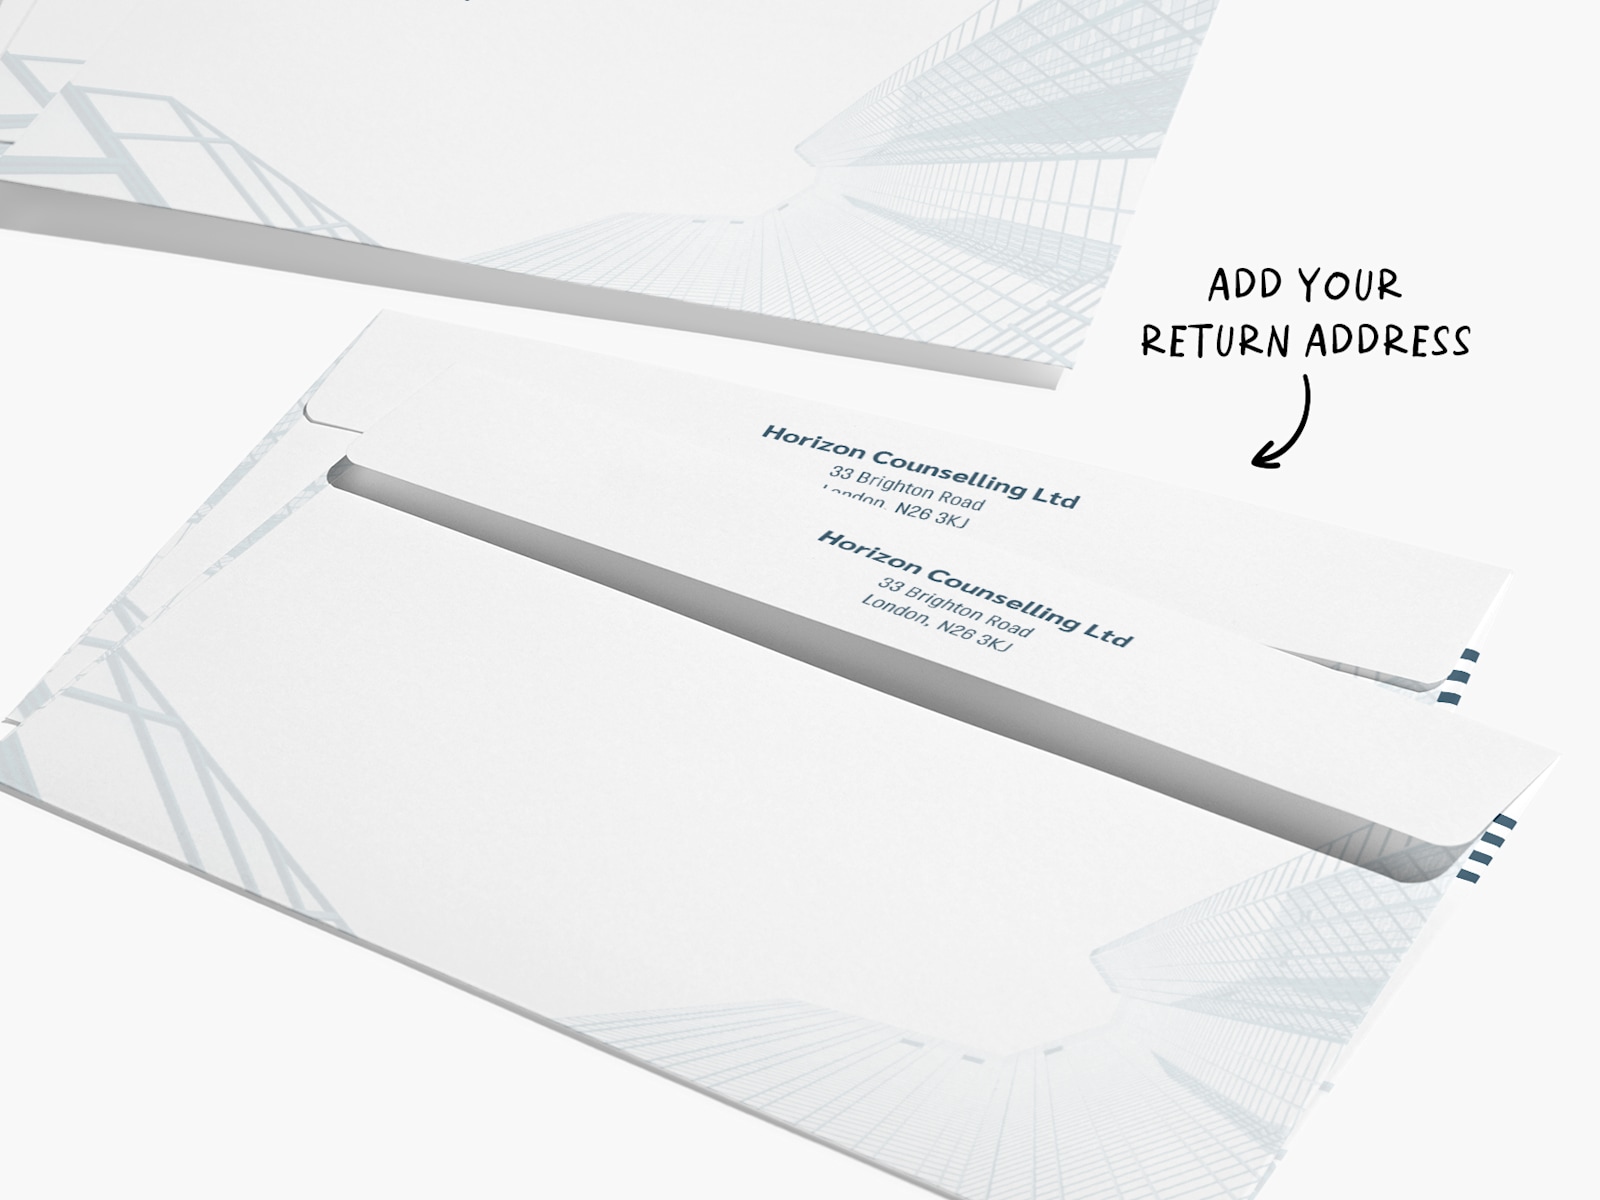 Back of a custom envelope with a business-focused design. There is text that says you can add your return address